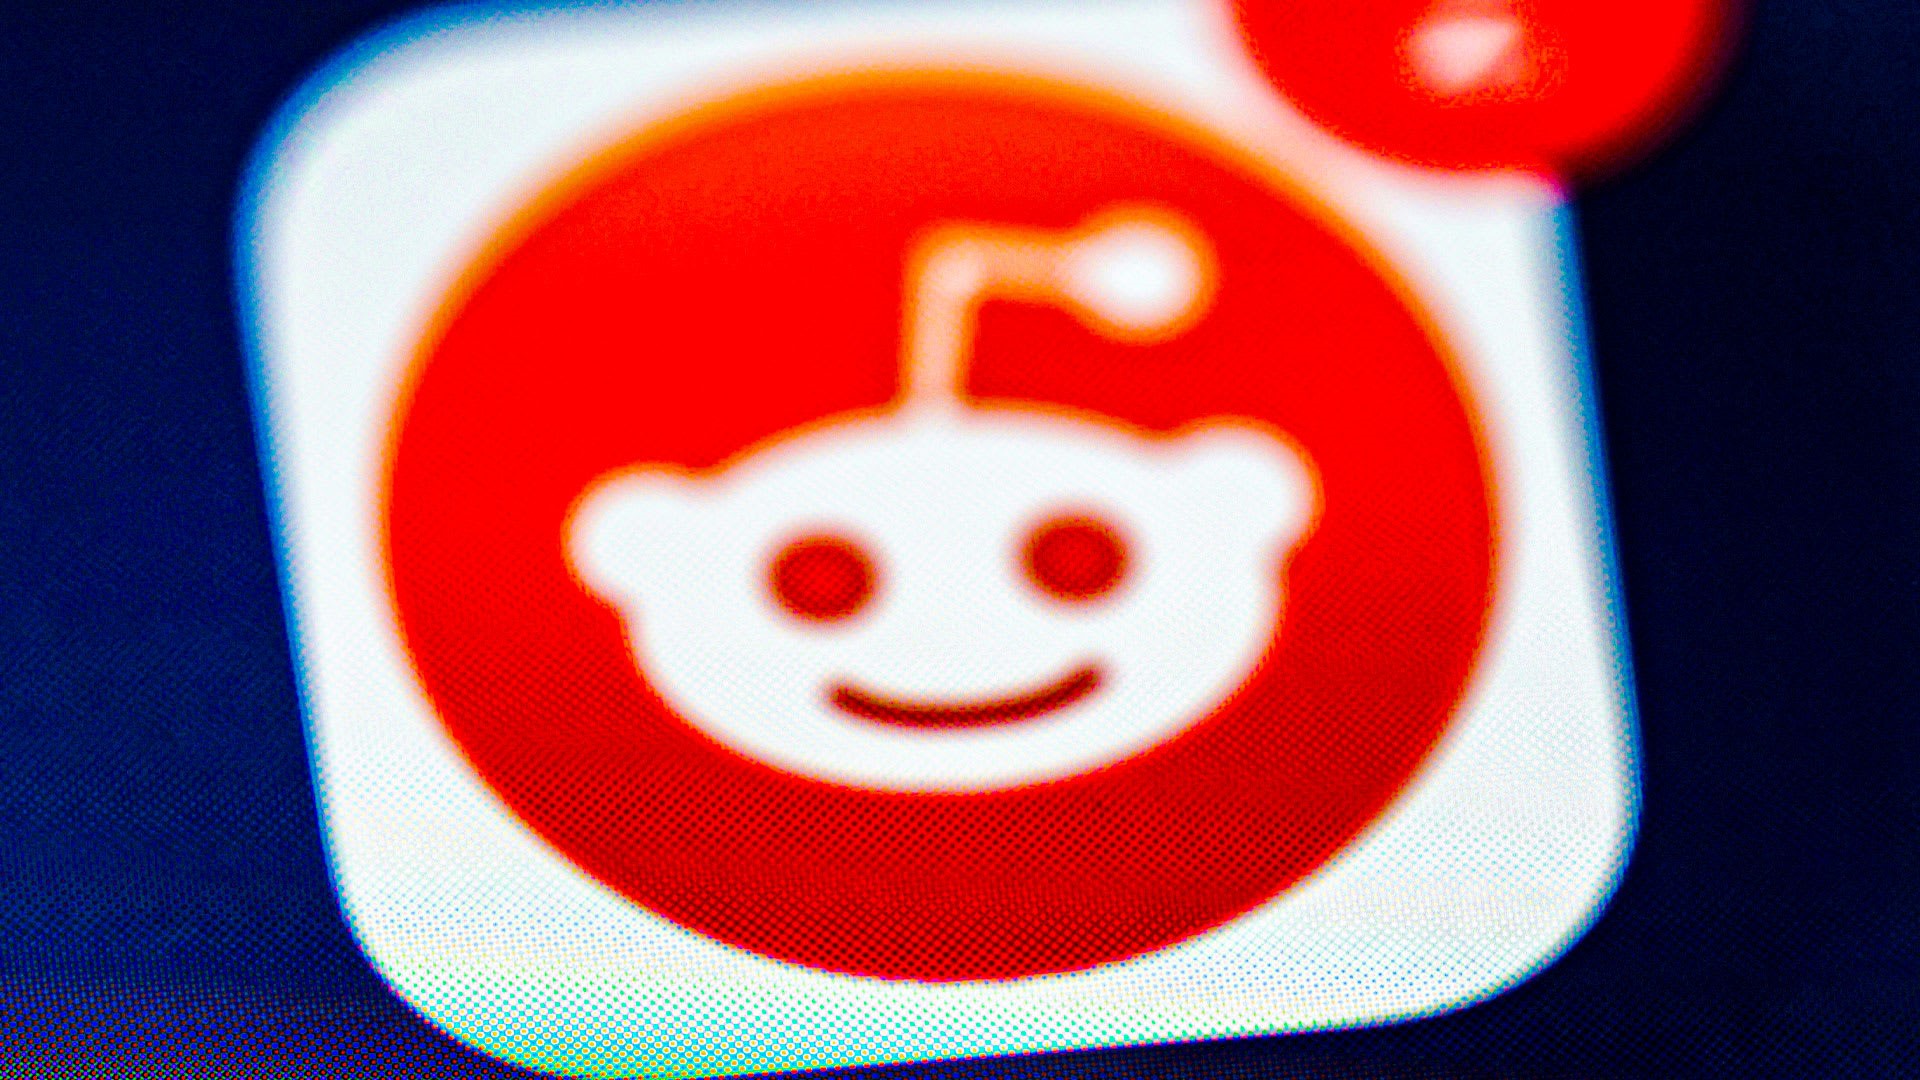 Reddit IPO update: target stock price, shares on offer revealed as NYSE listing date nears